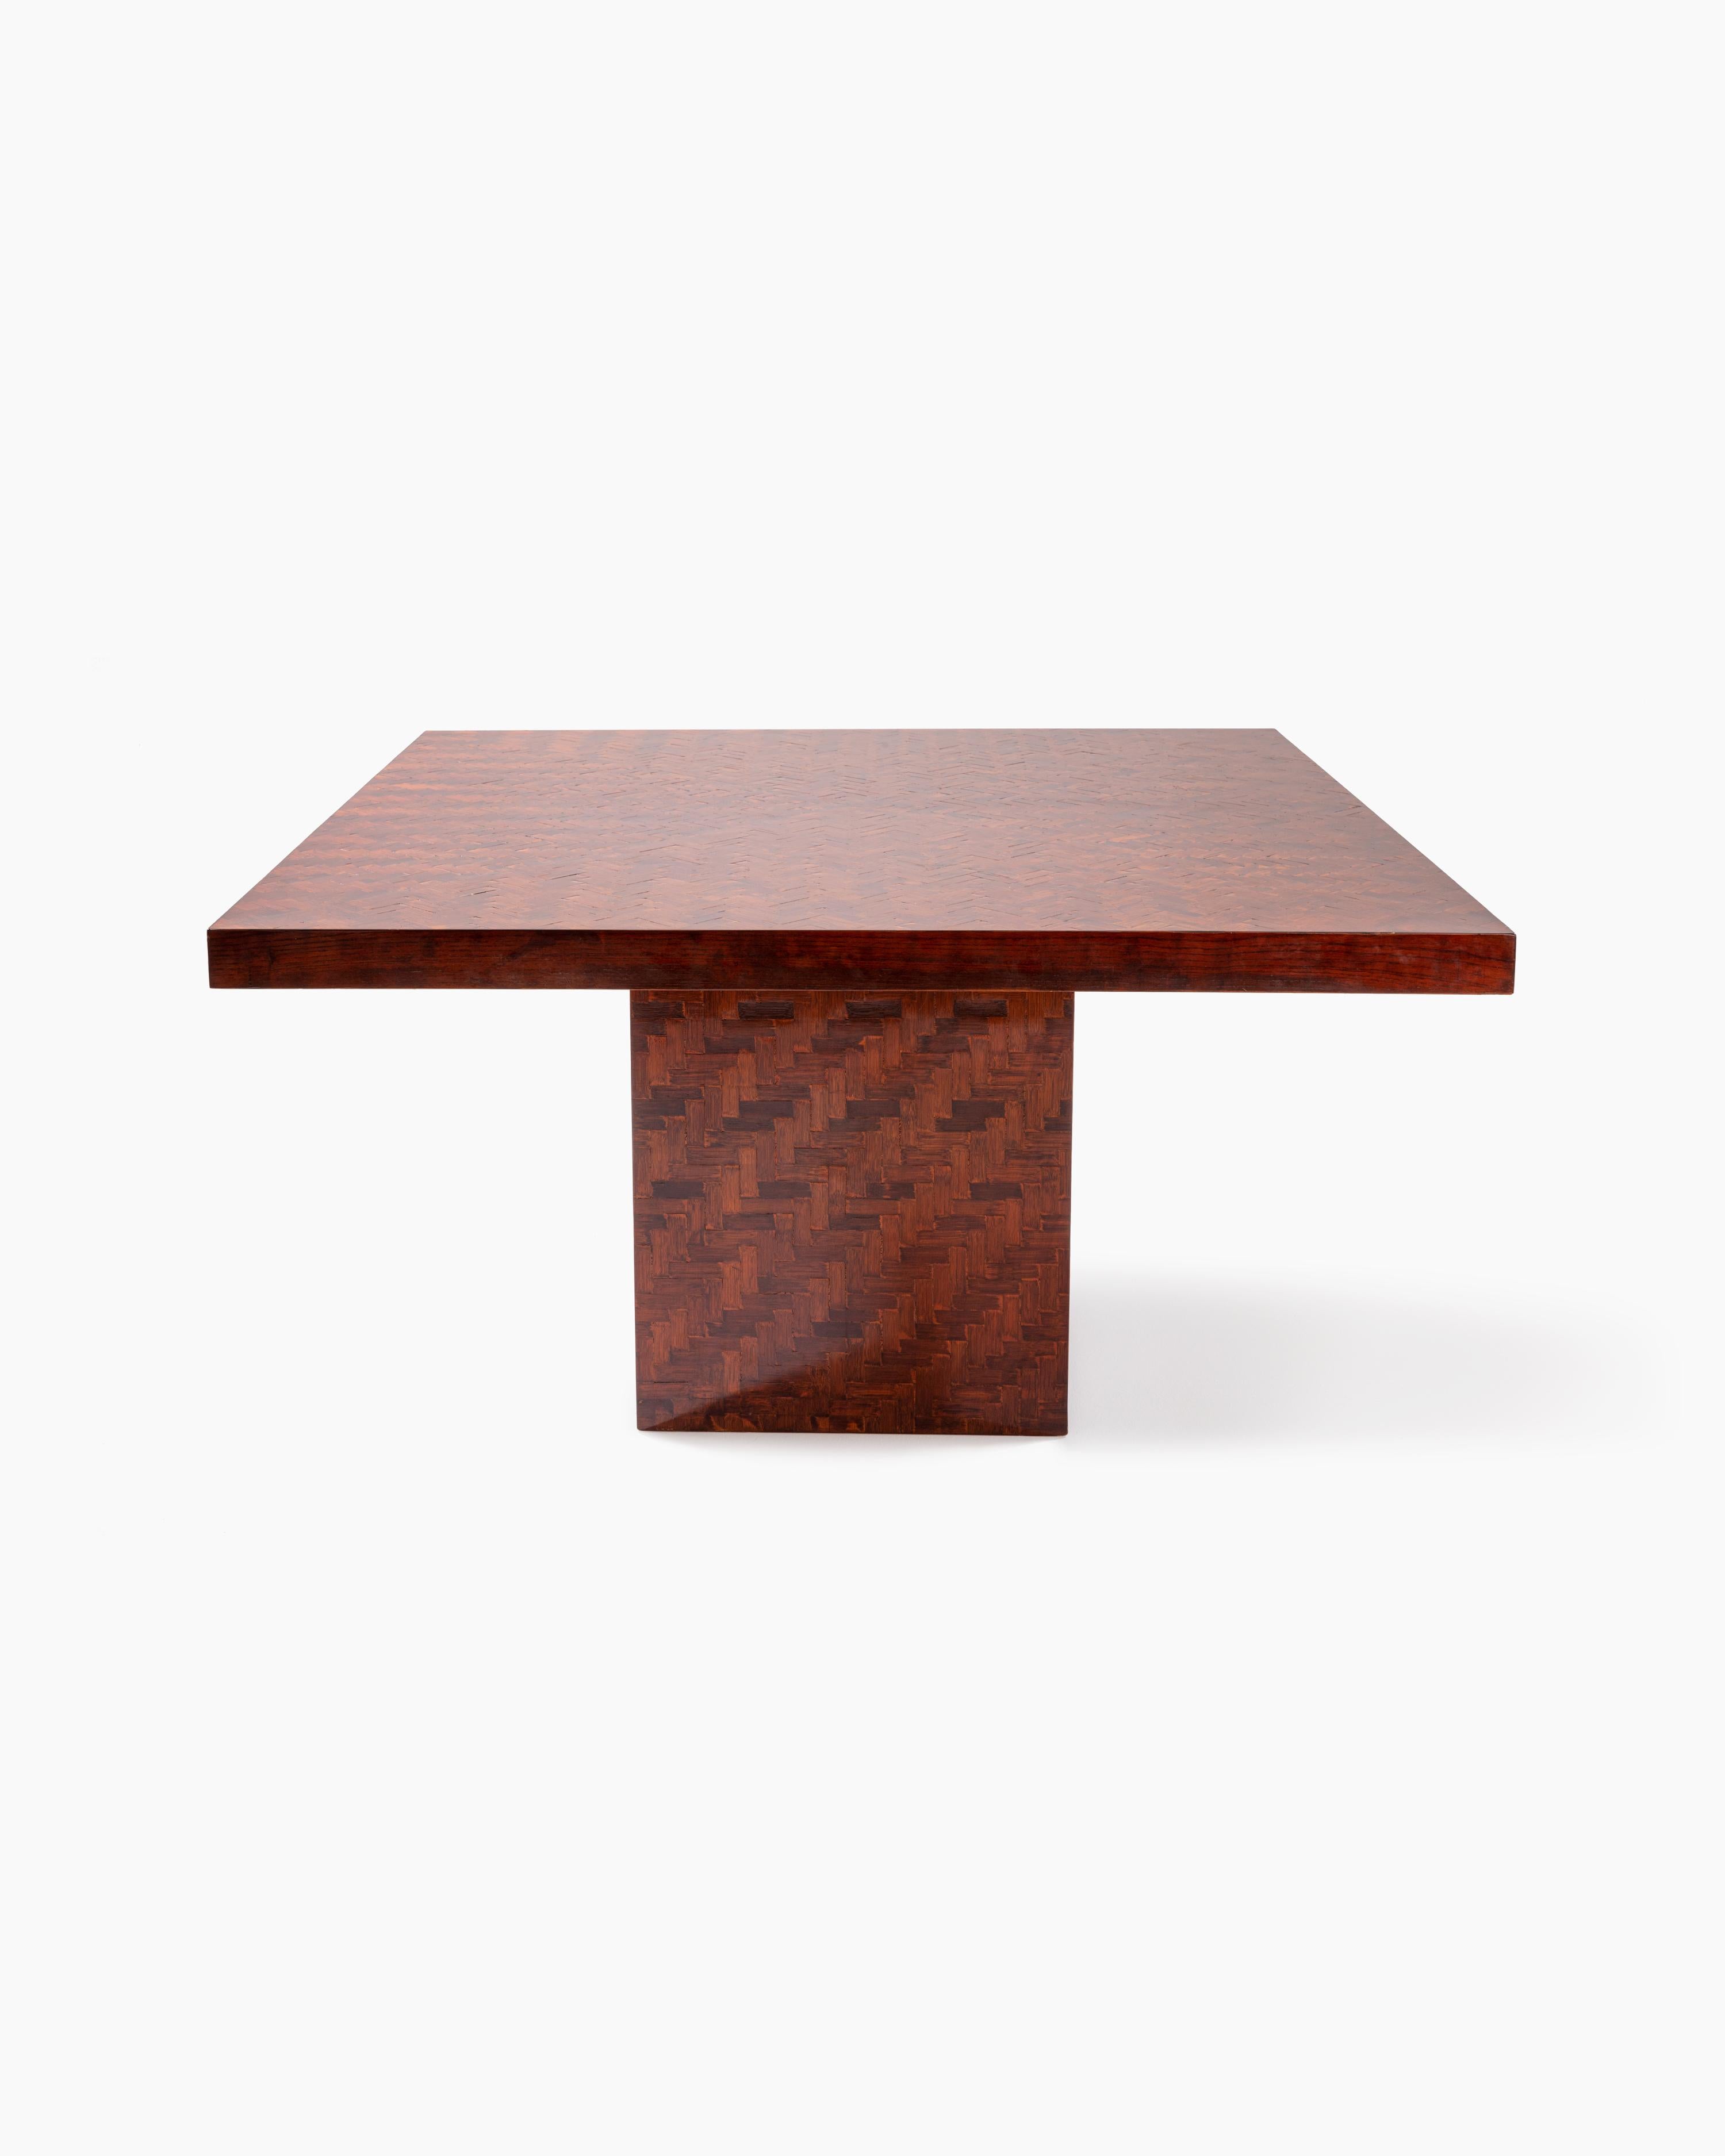 Produced by Mobilificio Fratelli Turri, founded by Pietro Turri in 1925, this square dining table honors the company’s value of craftsmanship and luxury in interior decorating, featuring Dyed Banana Leaf Weaving ontop of Wood finished with Varnish.